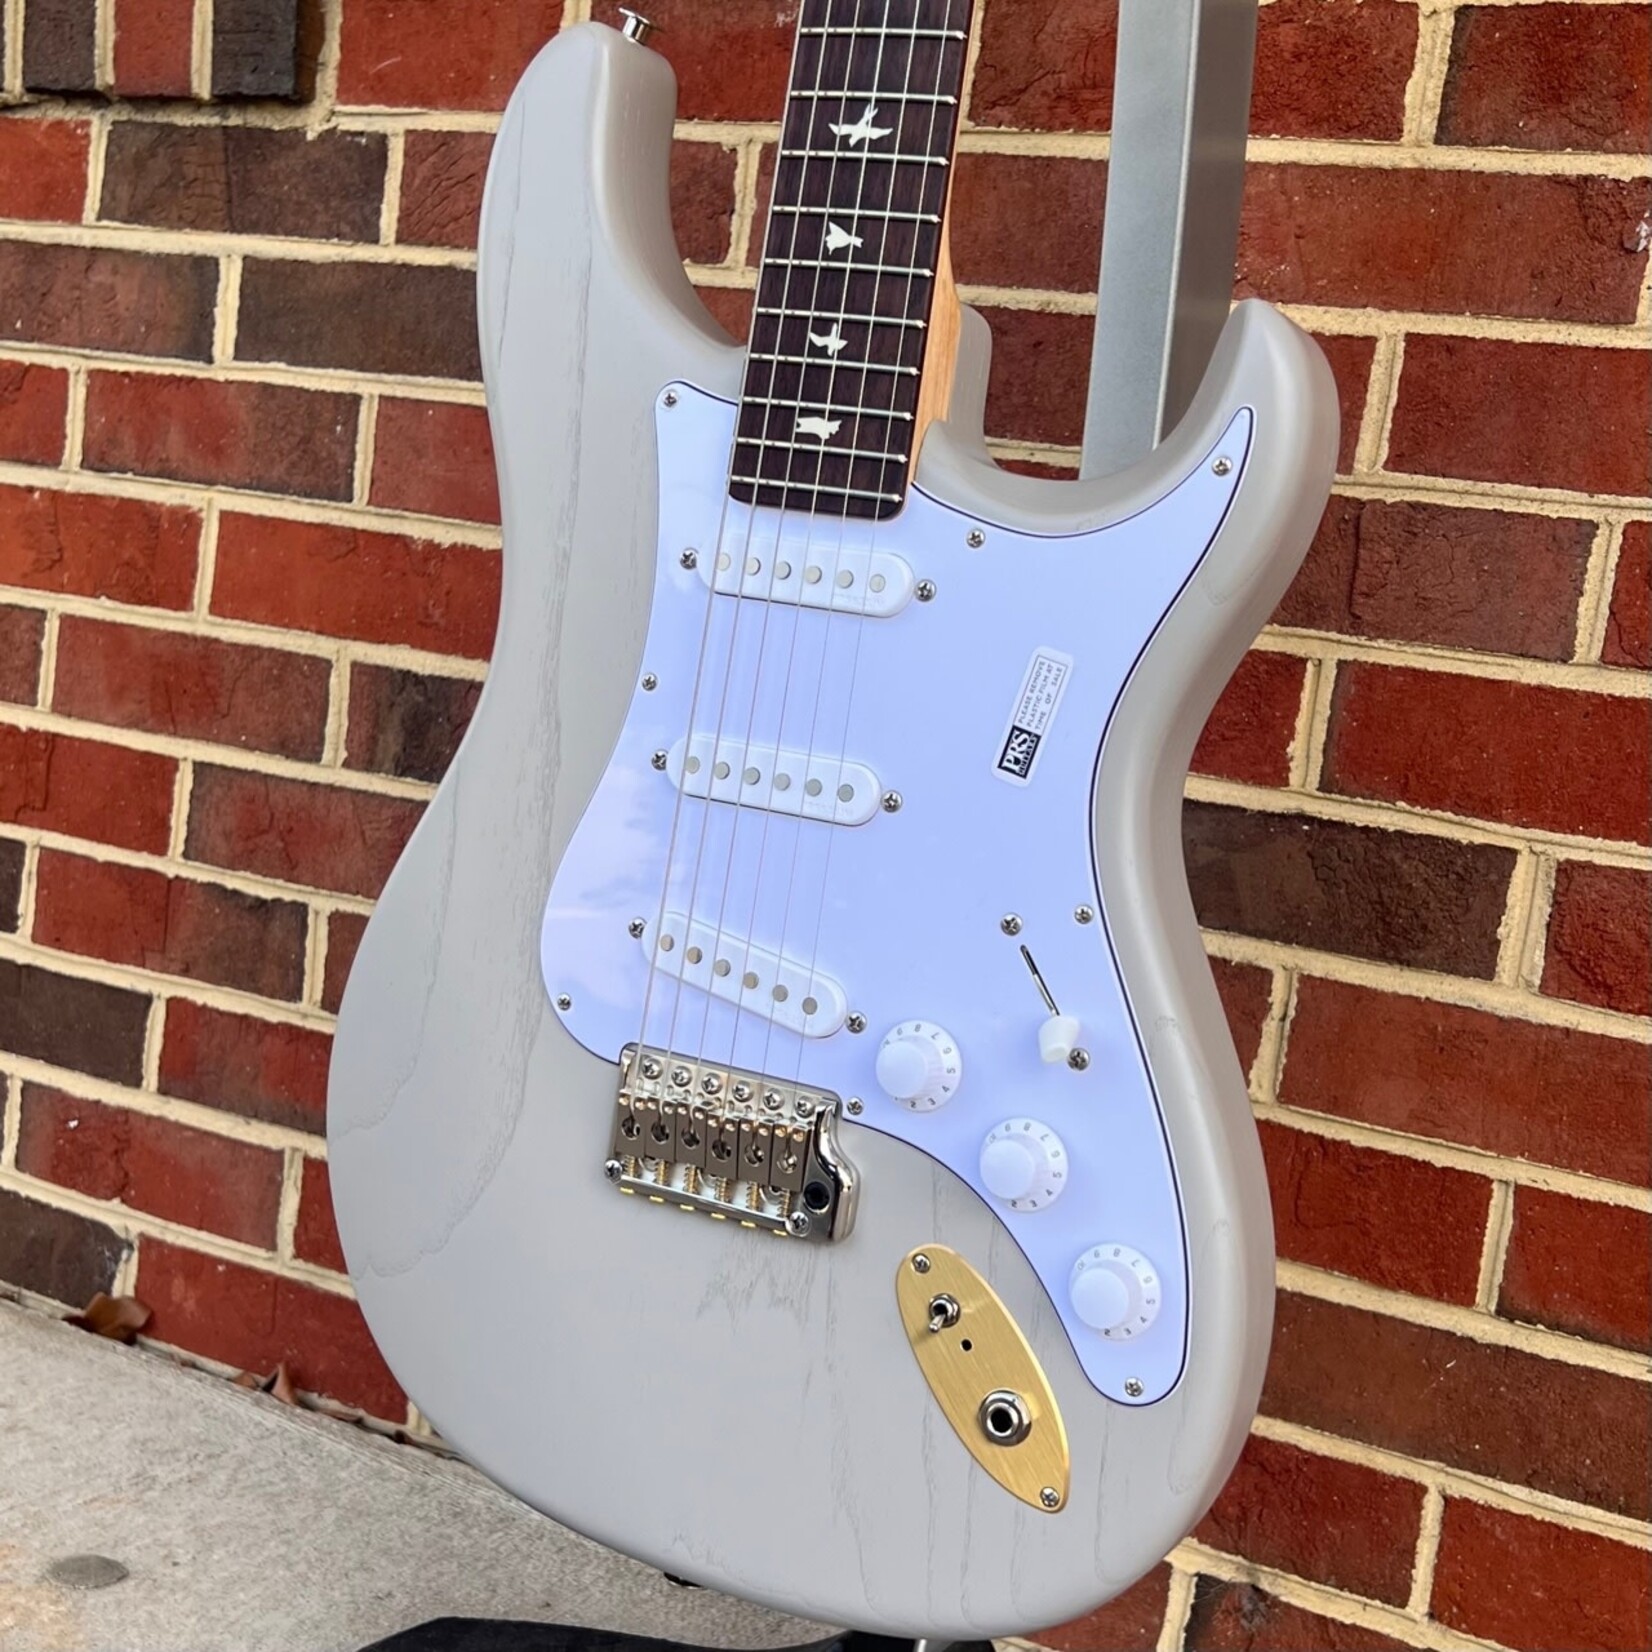 Paul Reed Smith Paul Reed Smith Silver Sky "Dead Spec", Limited Edition, Moc Sand Satin, Swamp Ash Body, Maple Neck, Rosewood Fretboard, Alembic Blaster Preamp, Hardshell Case